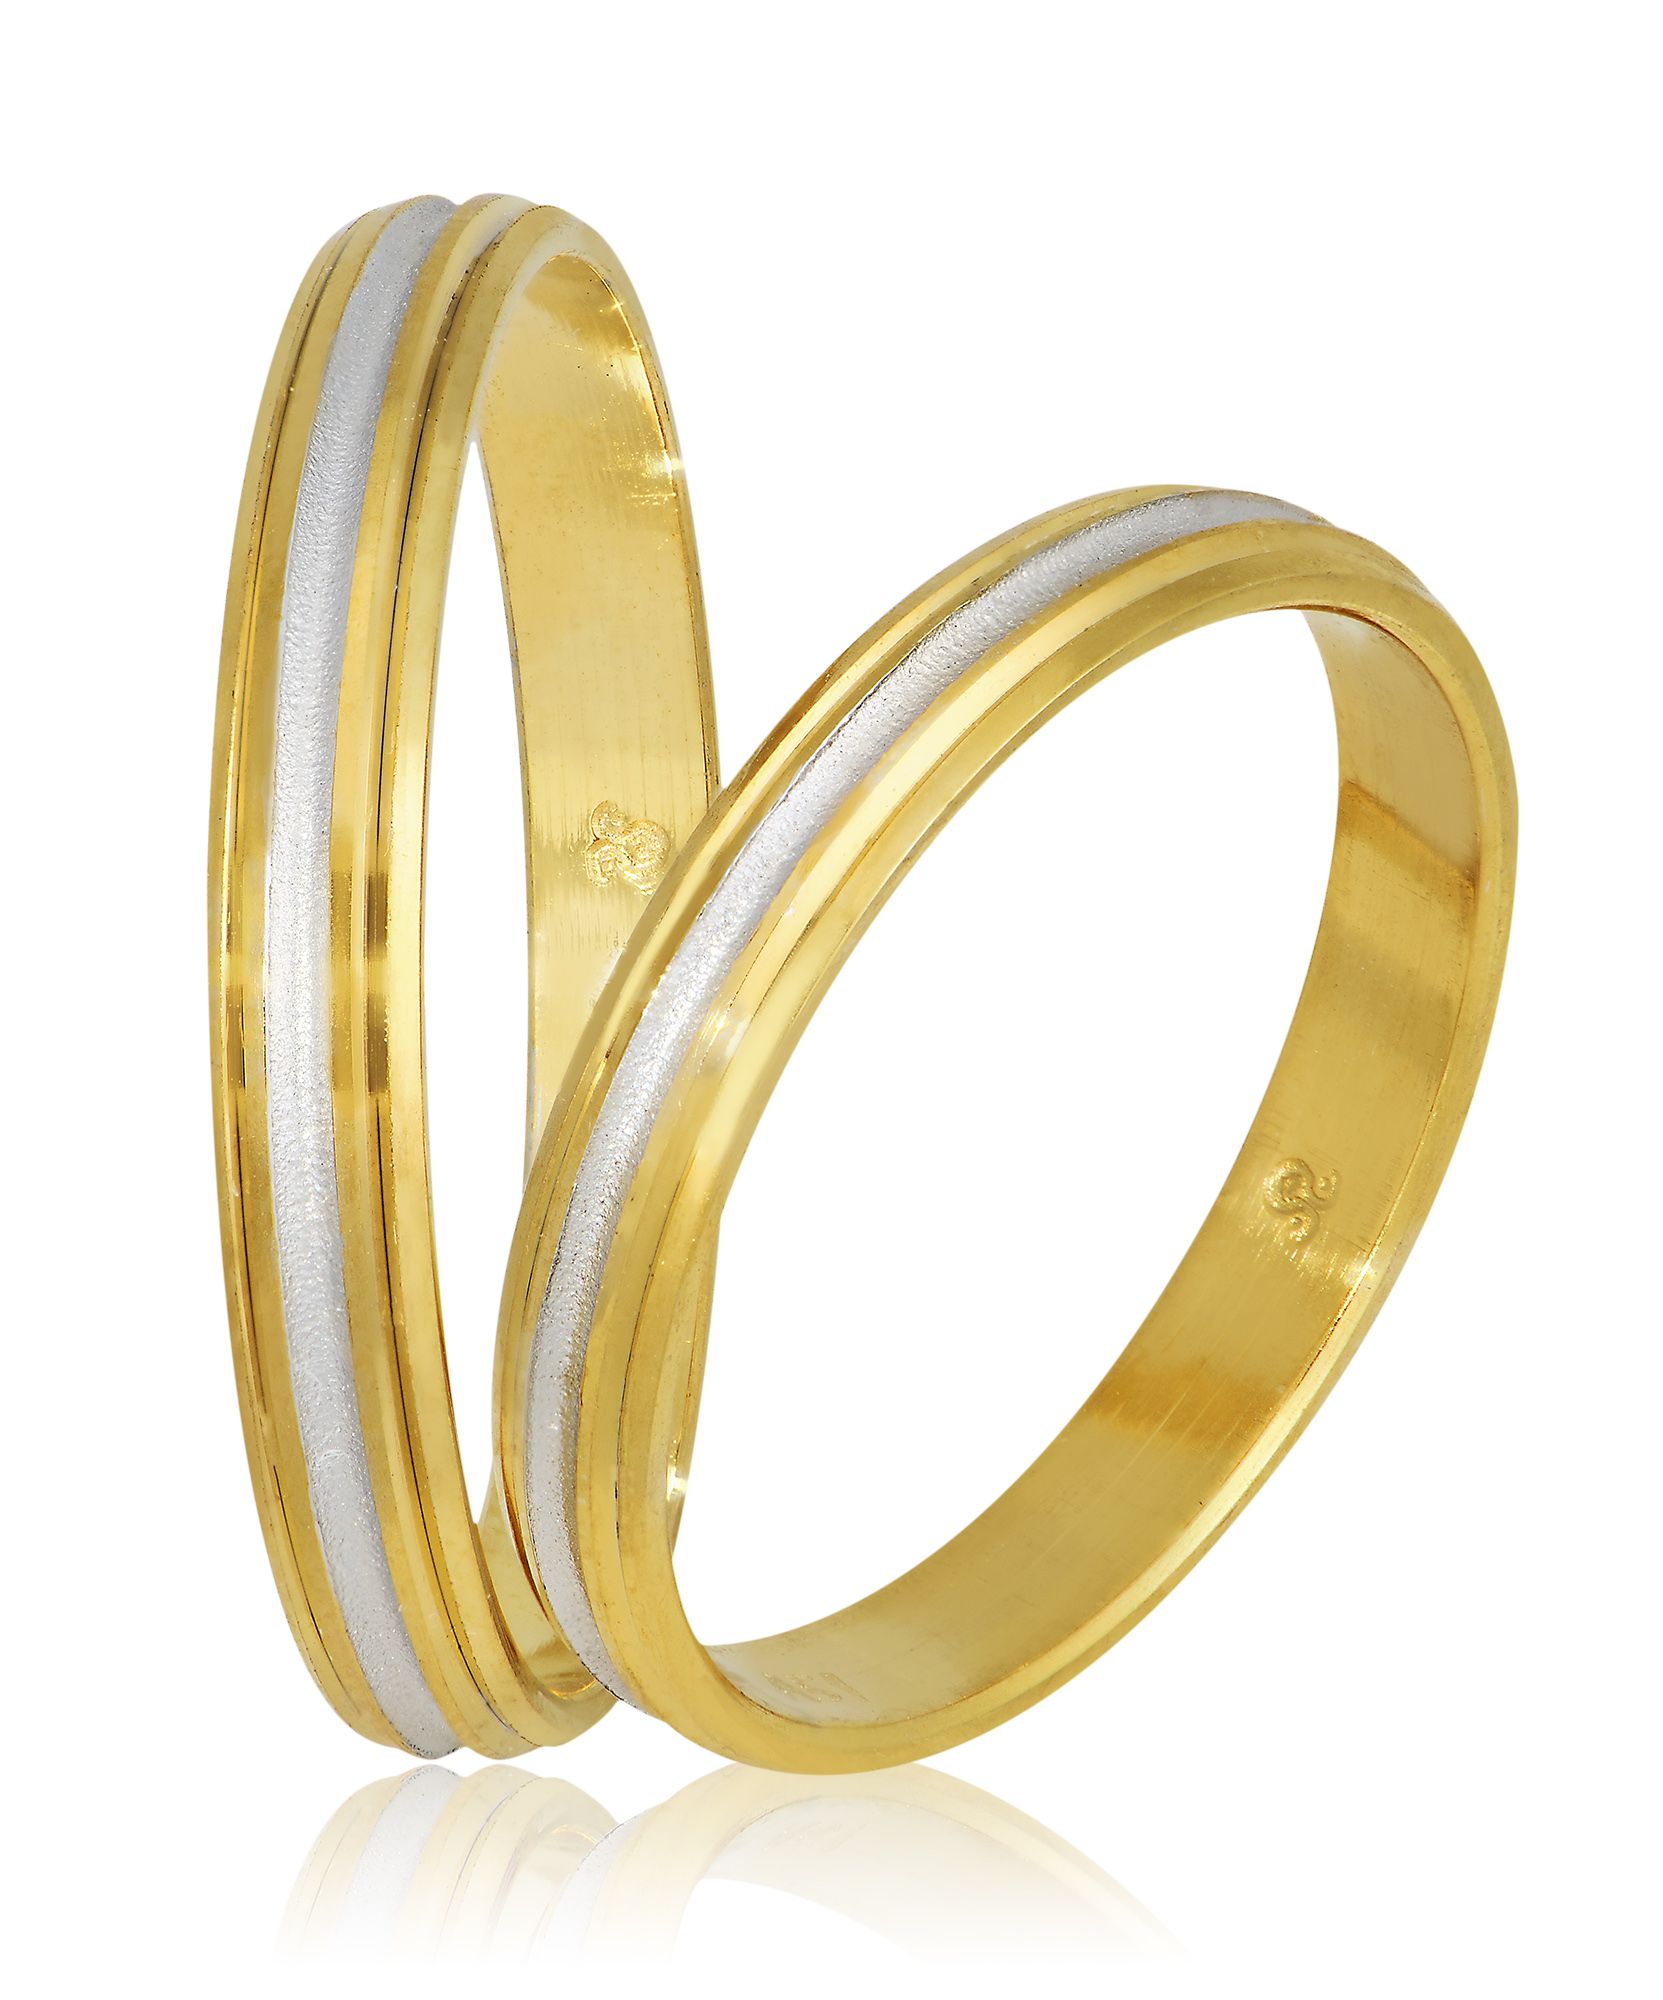 White gold & gold wedding rings 3mm (code Sxx5)